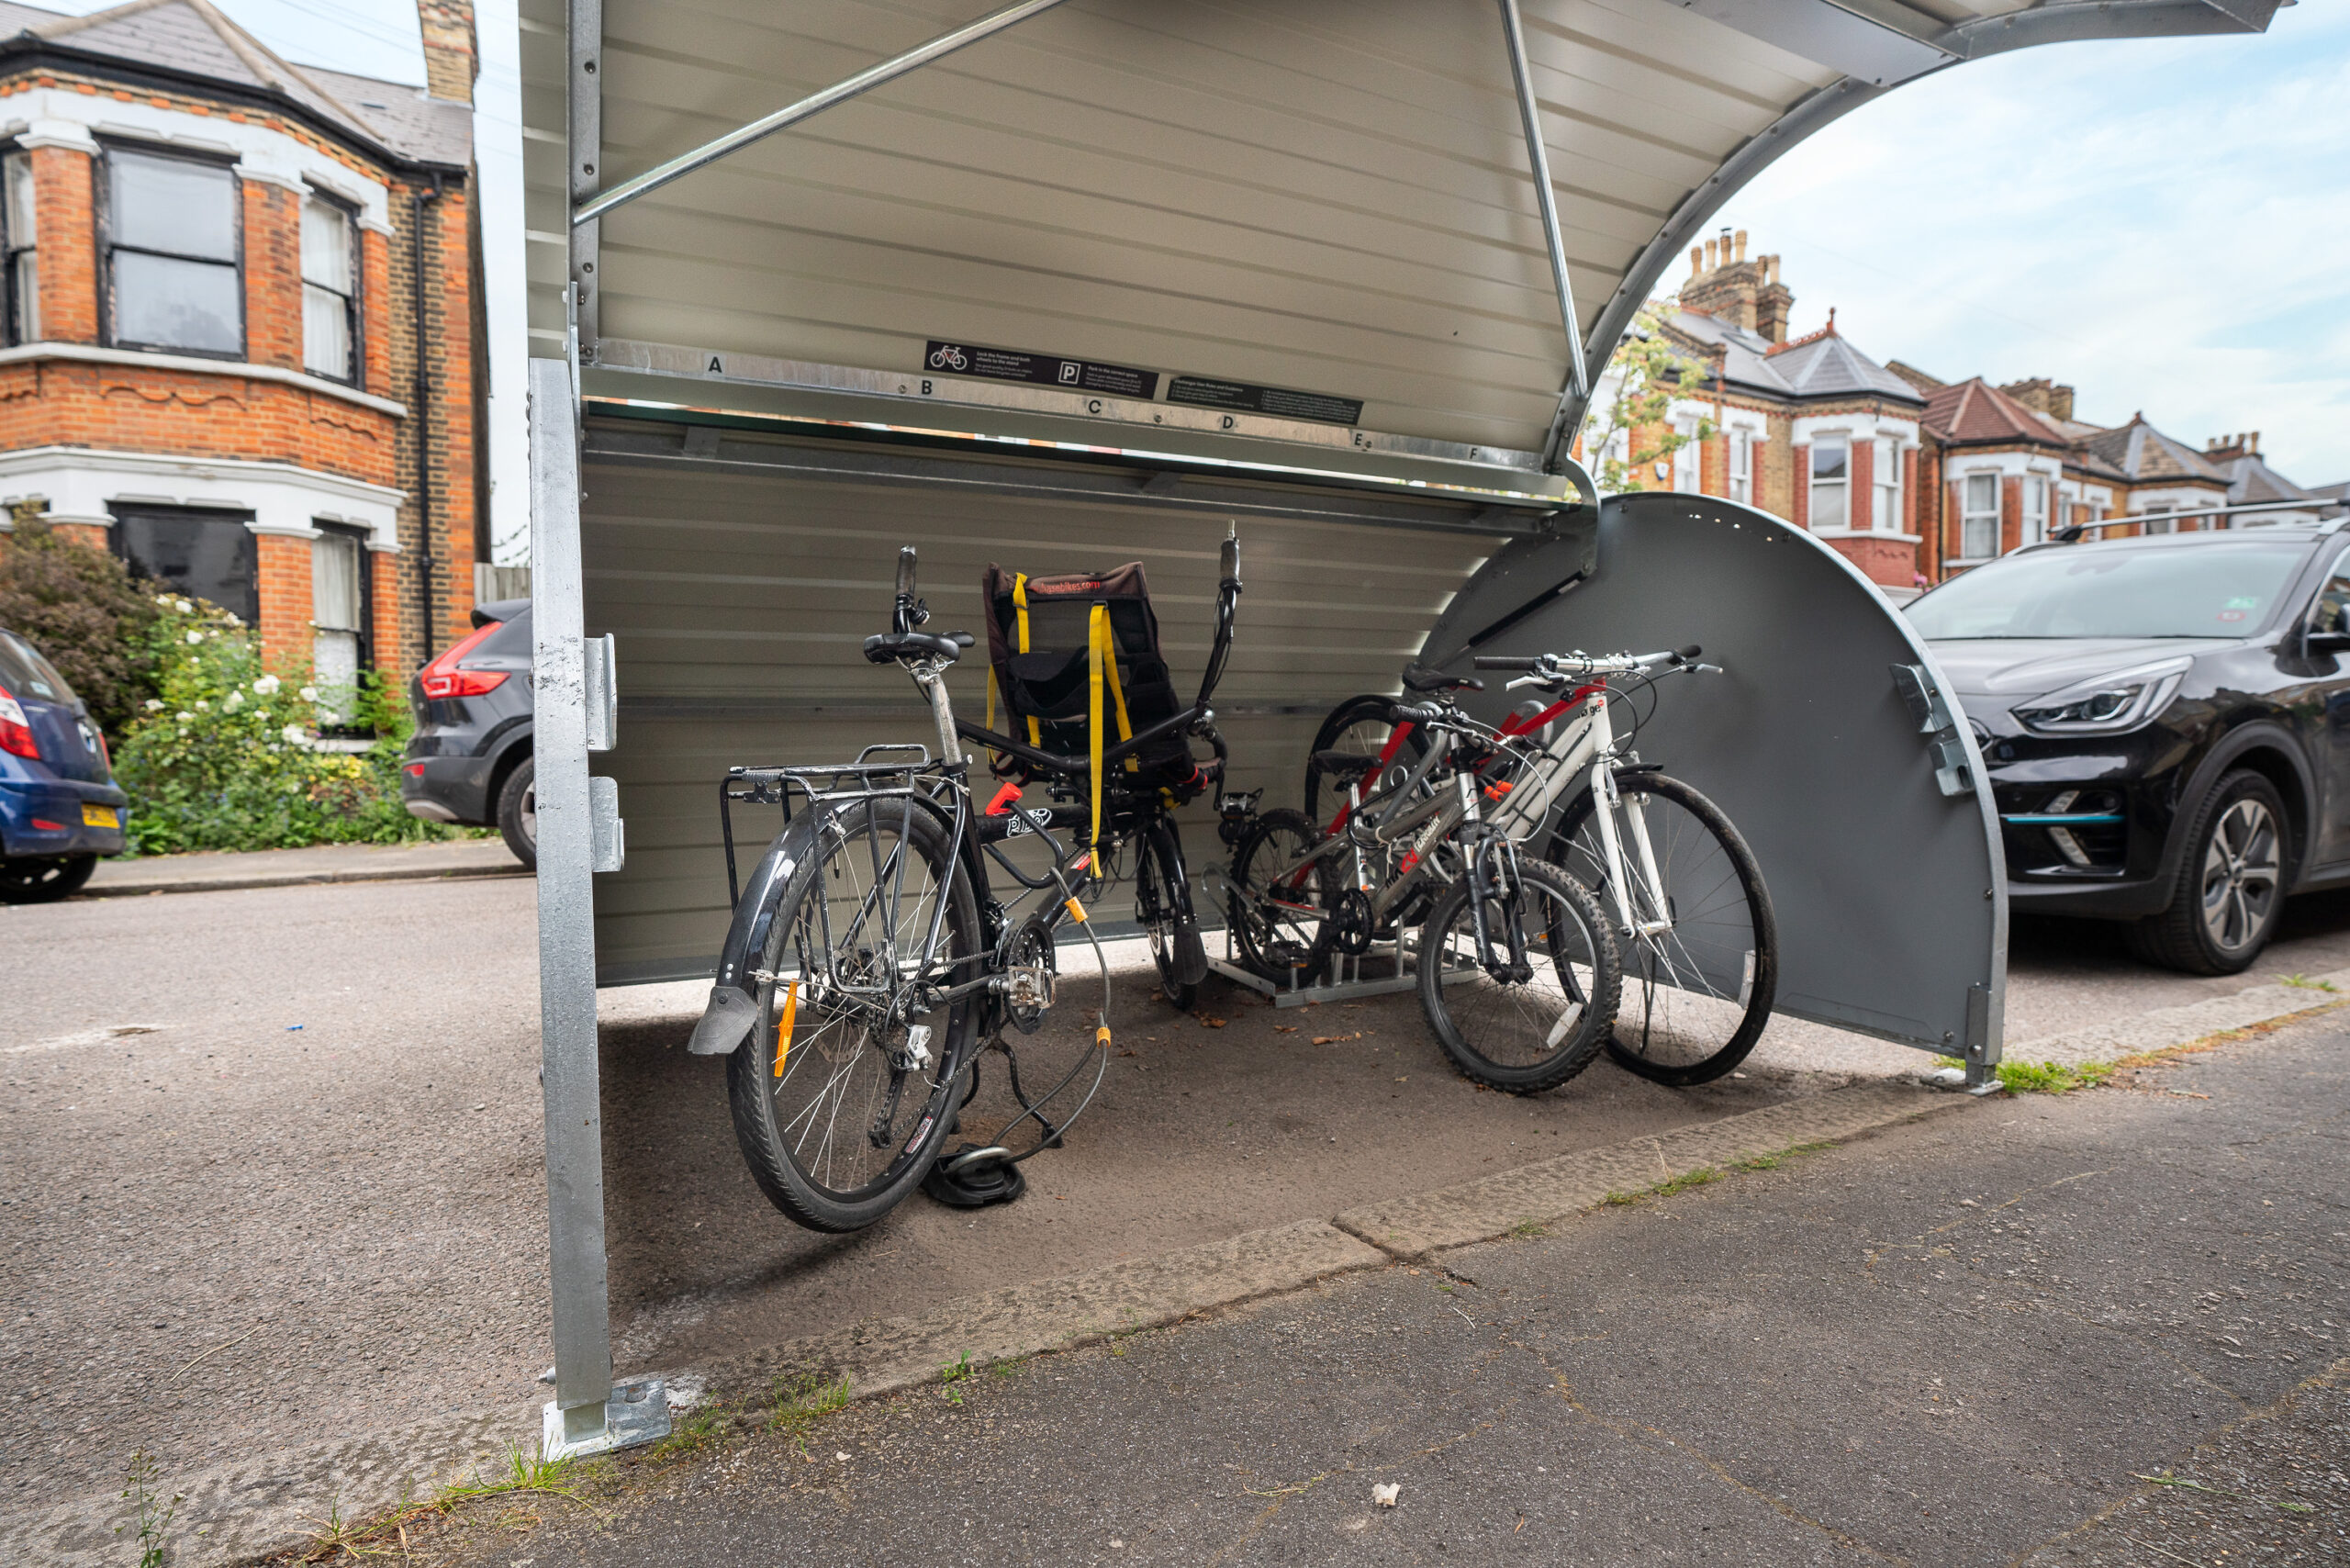 An adapted bikehangar interior with a recumbent bike and two other bicycles